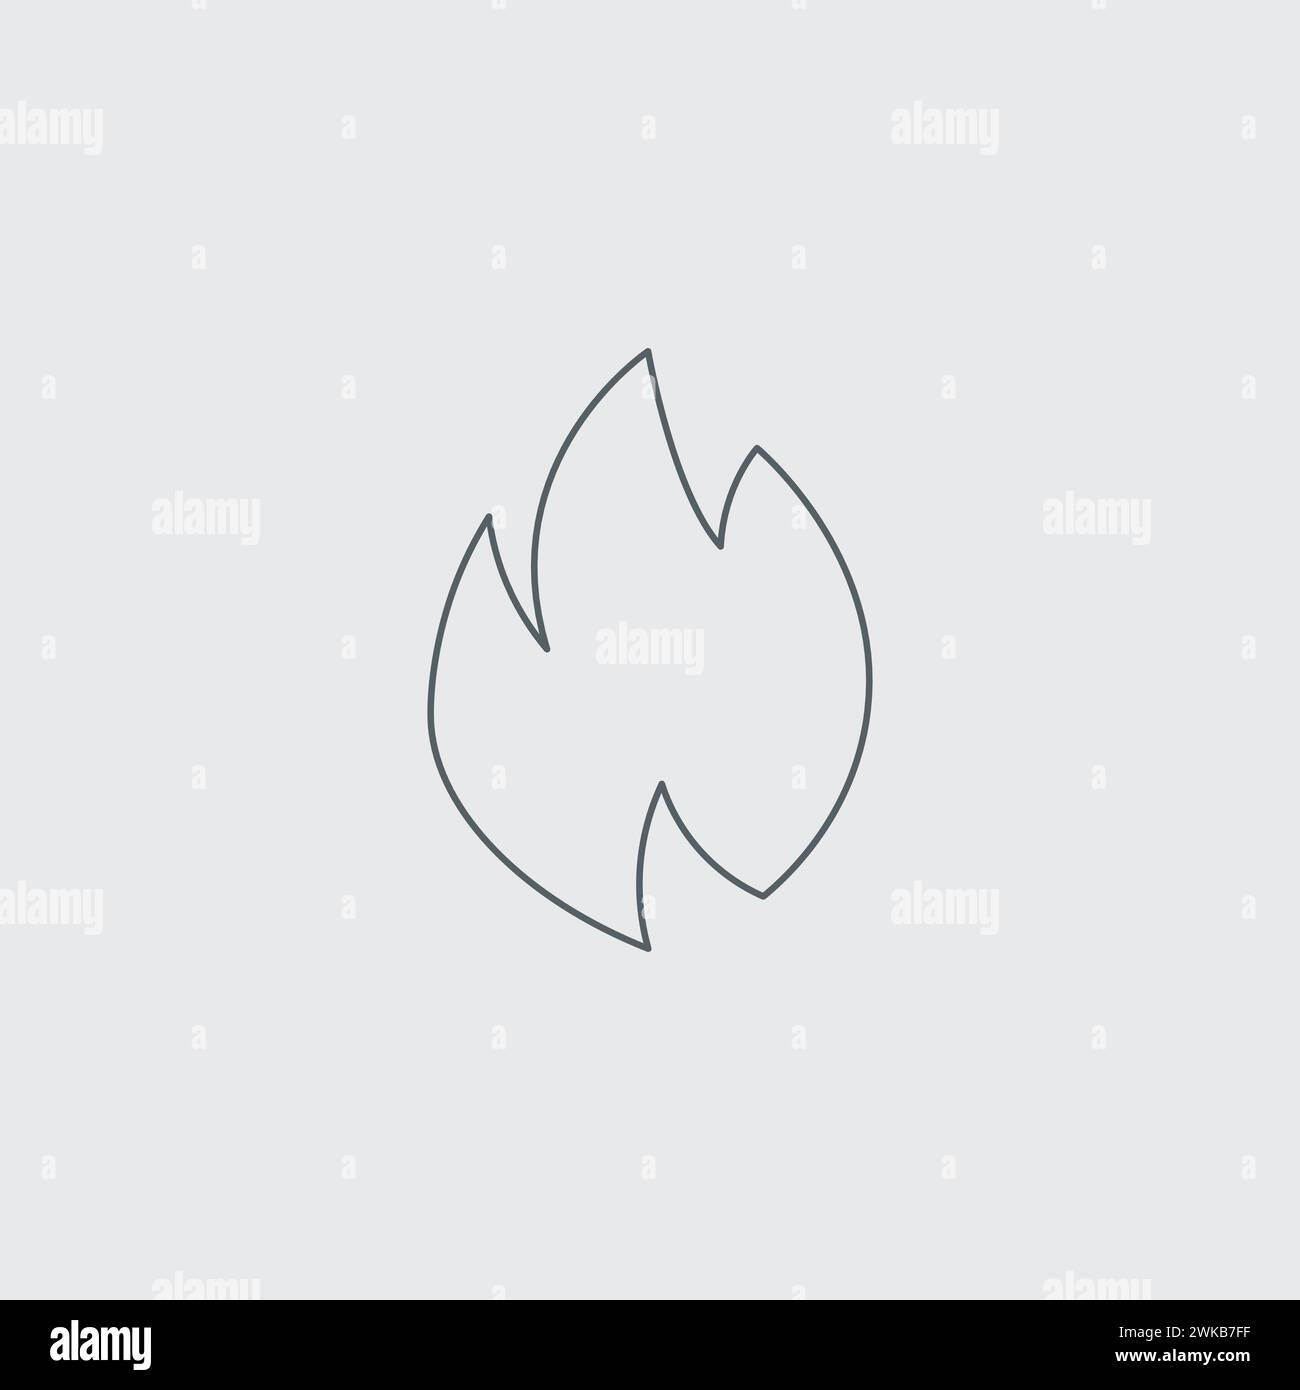 Fire flame linear icon. Fire heat flame silhouette. Simple energy campfire icon. Stock vector illustration isolated on white background. Stock Vector